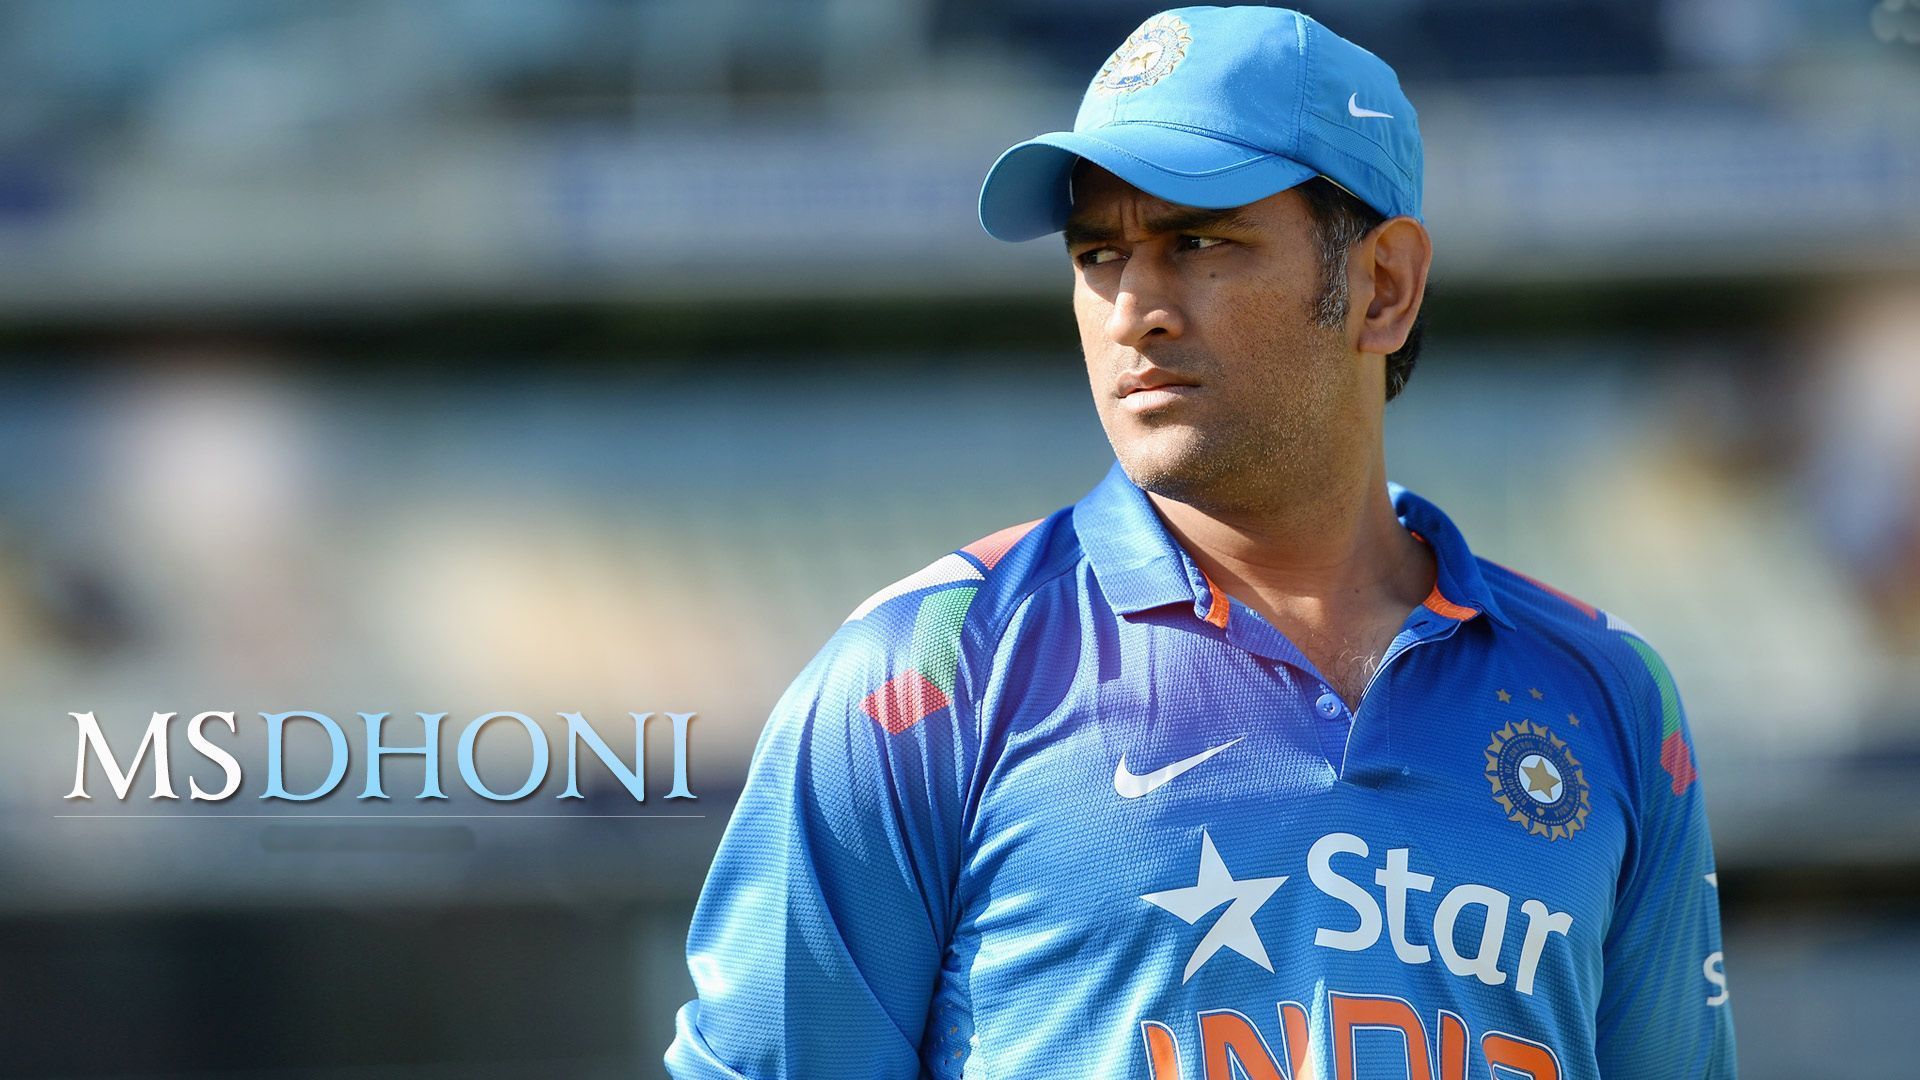 4k Ultra HD Ms Dhoni Quotes Wallpaper